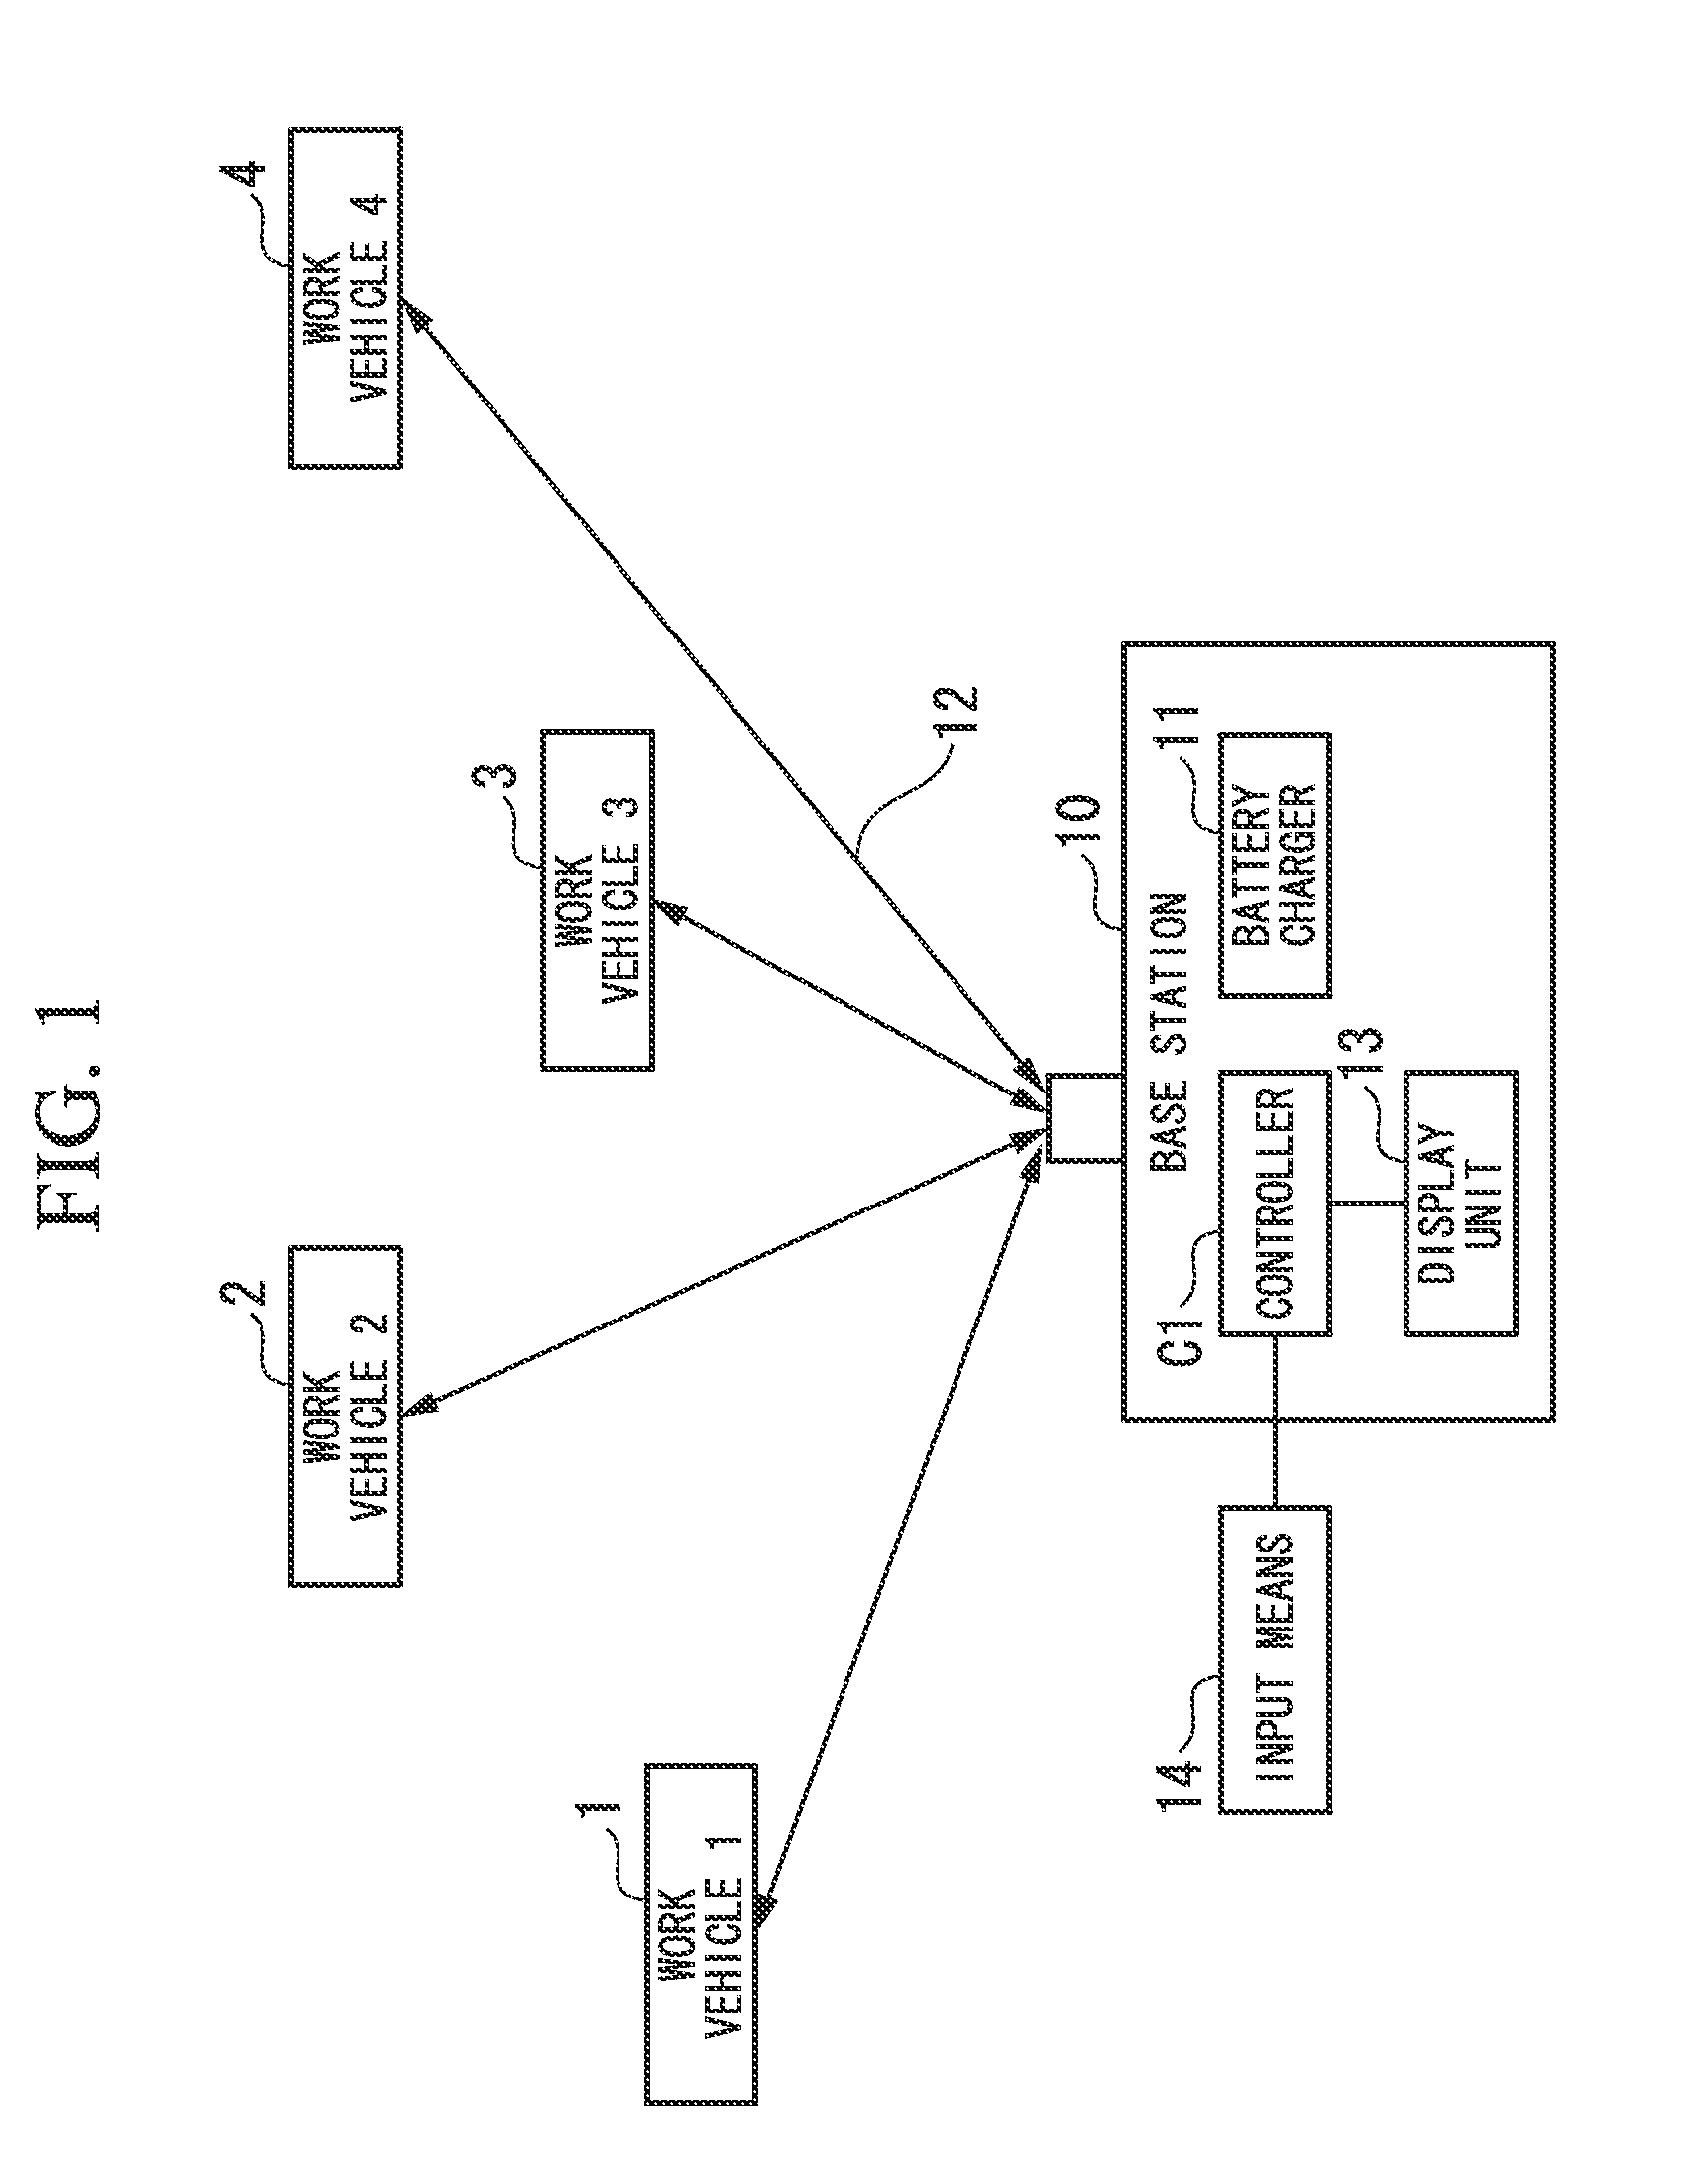 Management method for charging secondary batteries of work vehicles, and system for charging secondary batteries of work vehicles